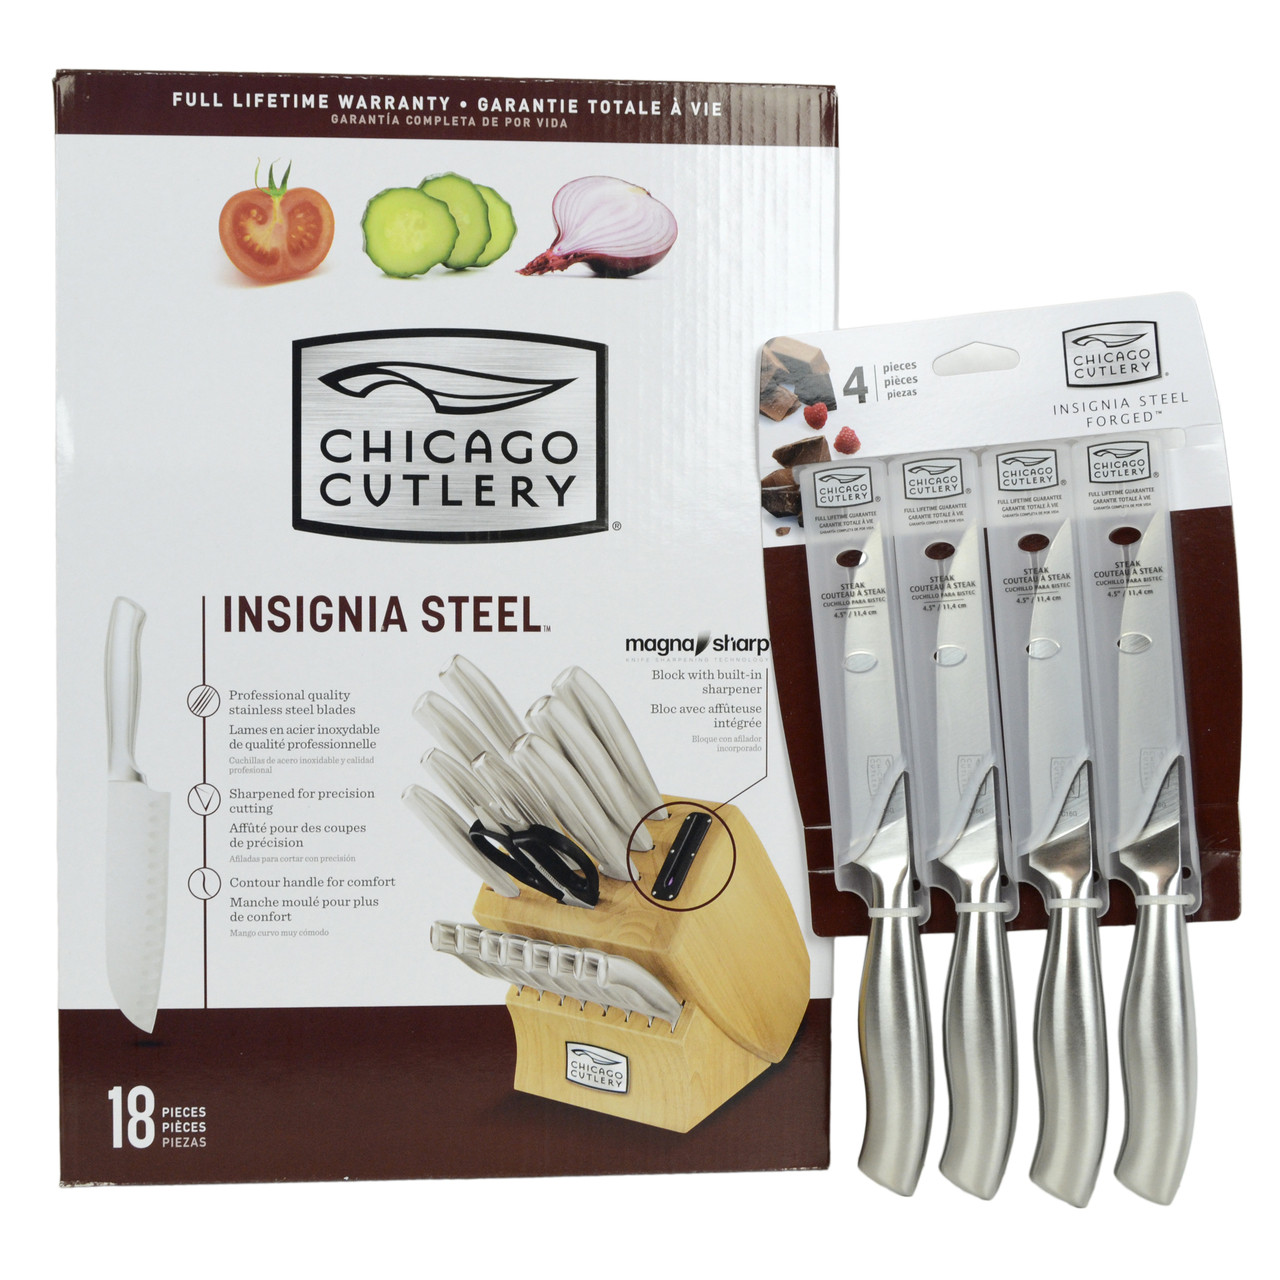 Chicago Cutlery Insignia Stainless Steel 18-PcKnife Block Set 